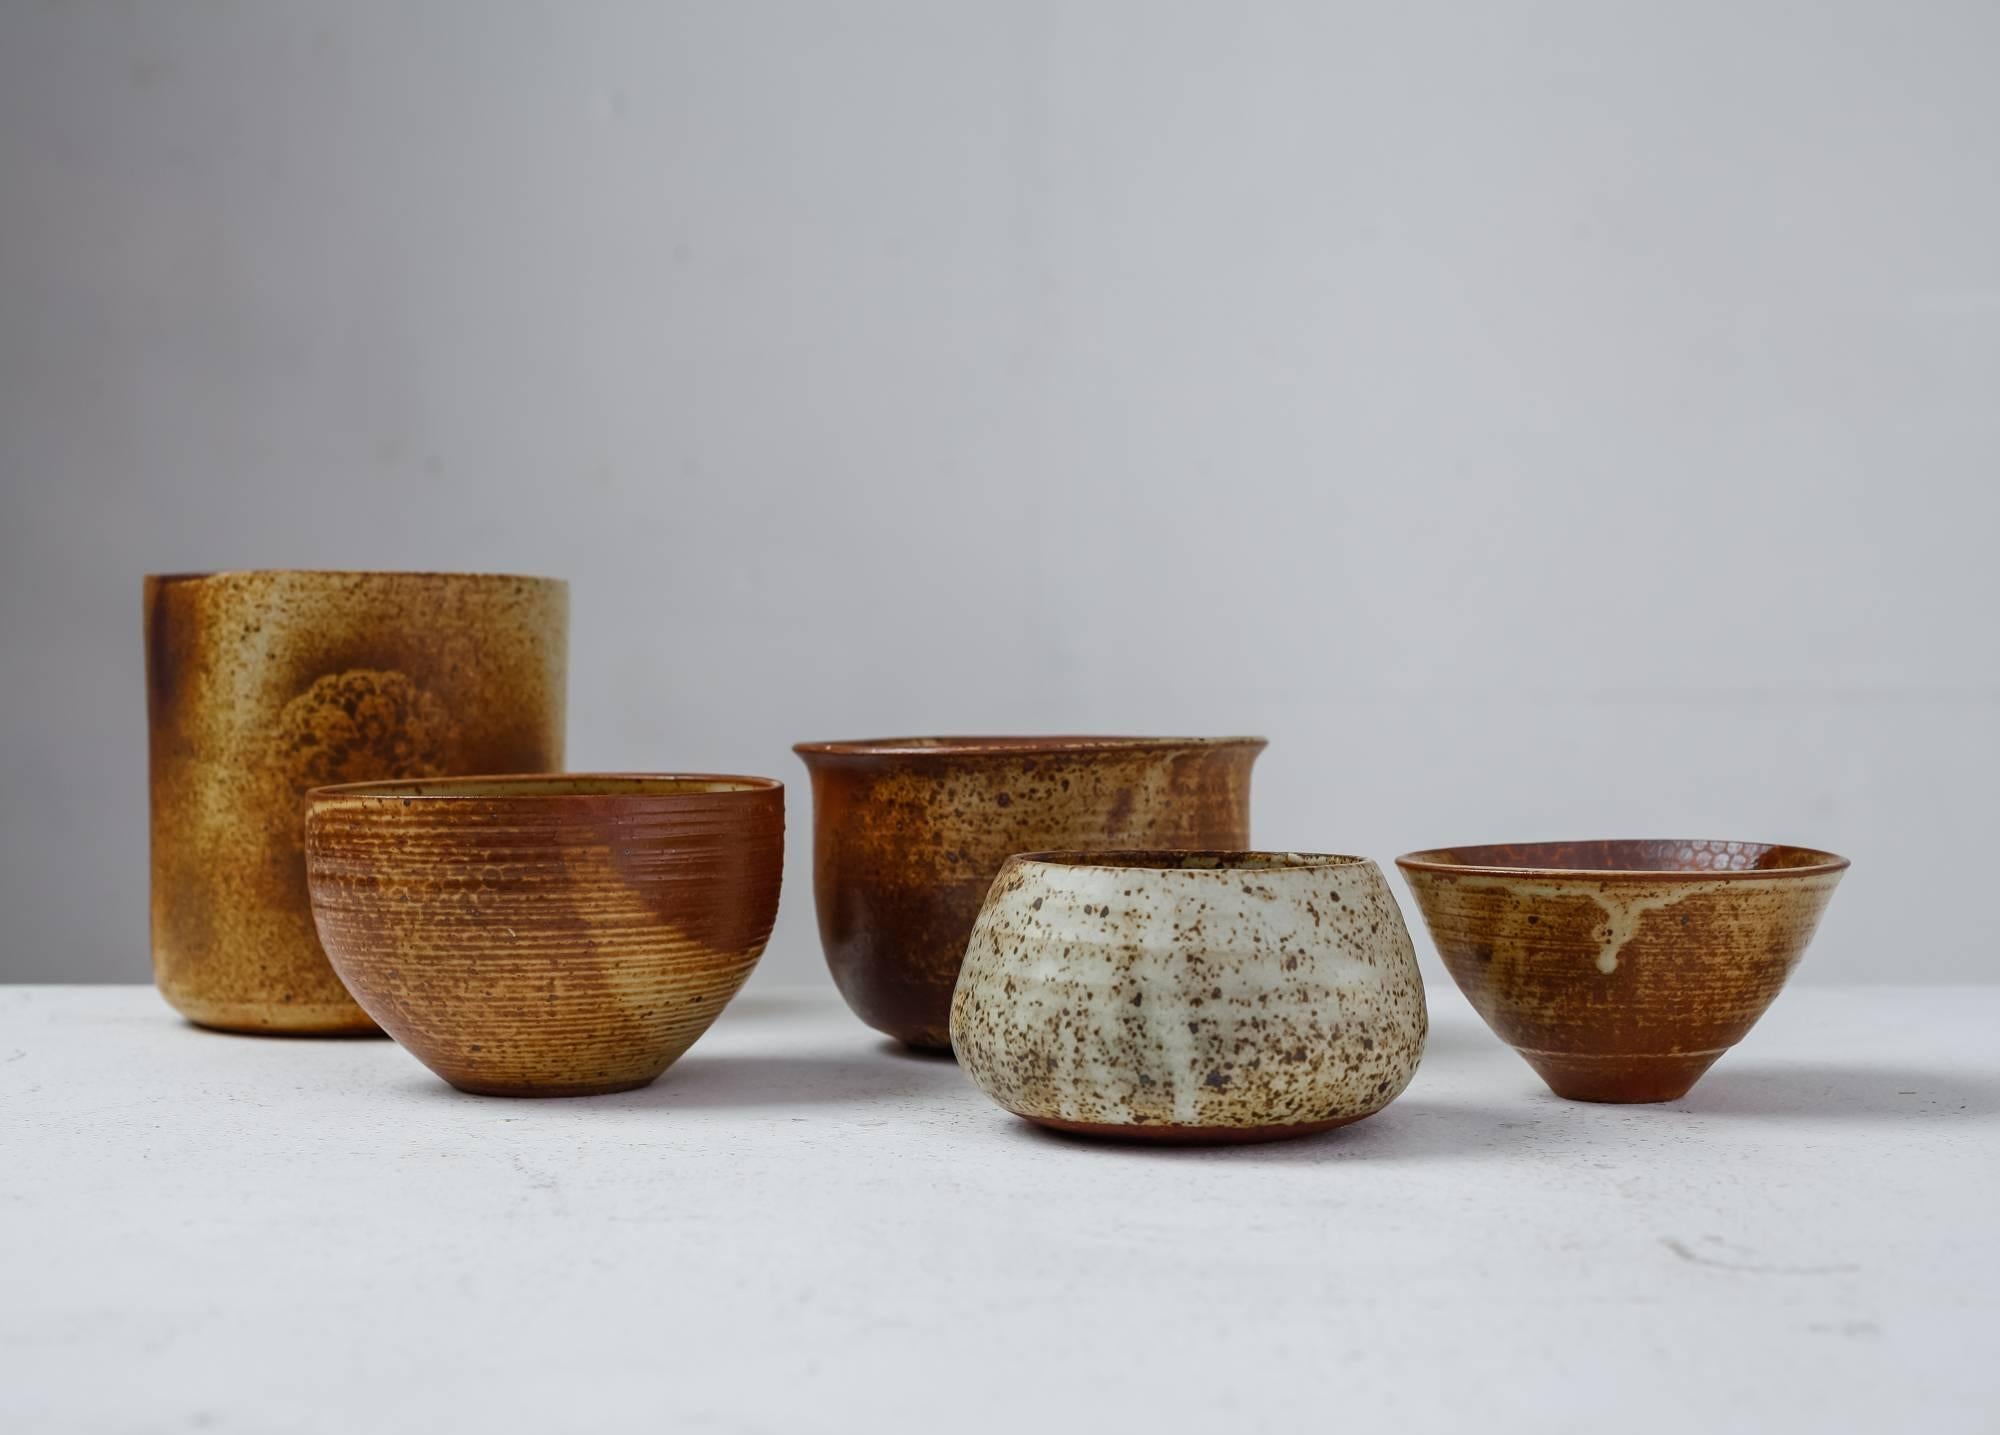 A set of five bowls with a brown and earth tone glaze finish, by French ceramist Franco Agnese. 
The lowest piece is 6.5 cm (2.5